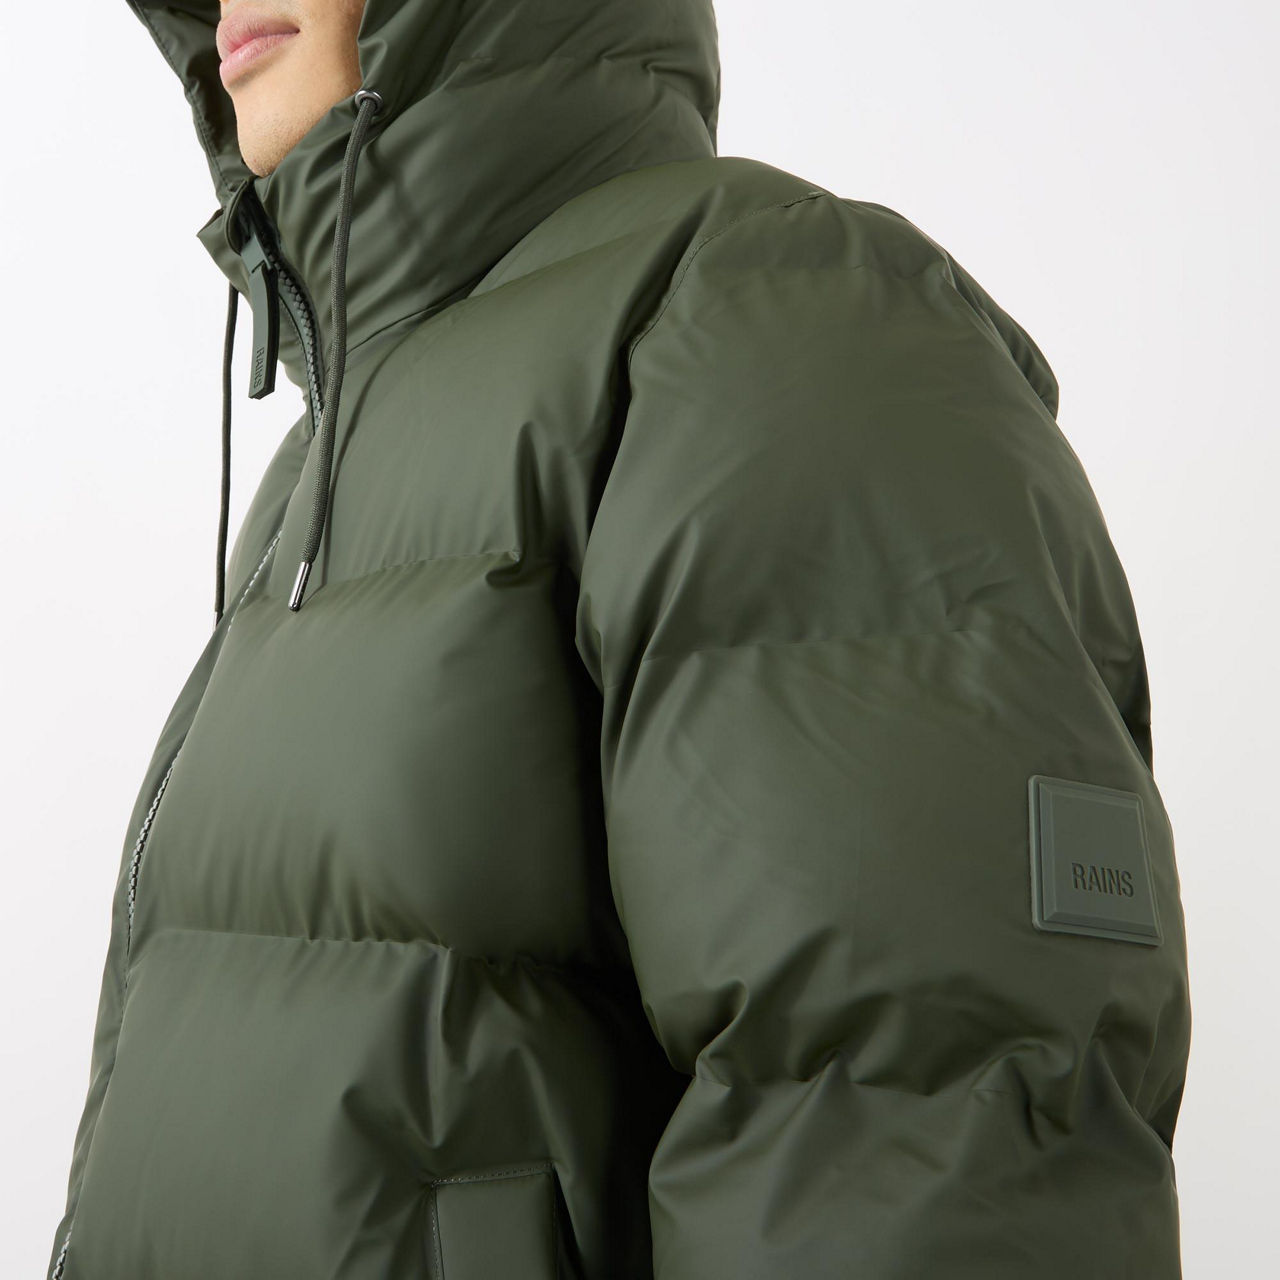 Rains® Alta Long Puffer Jacket in Green for $680